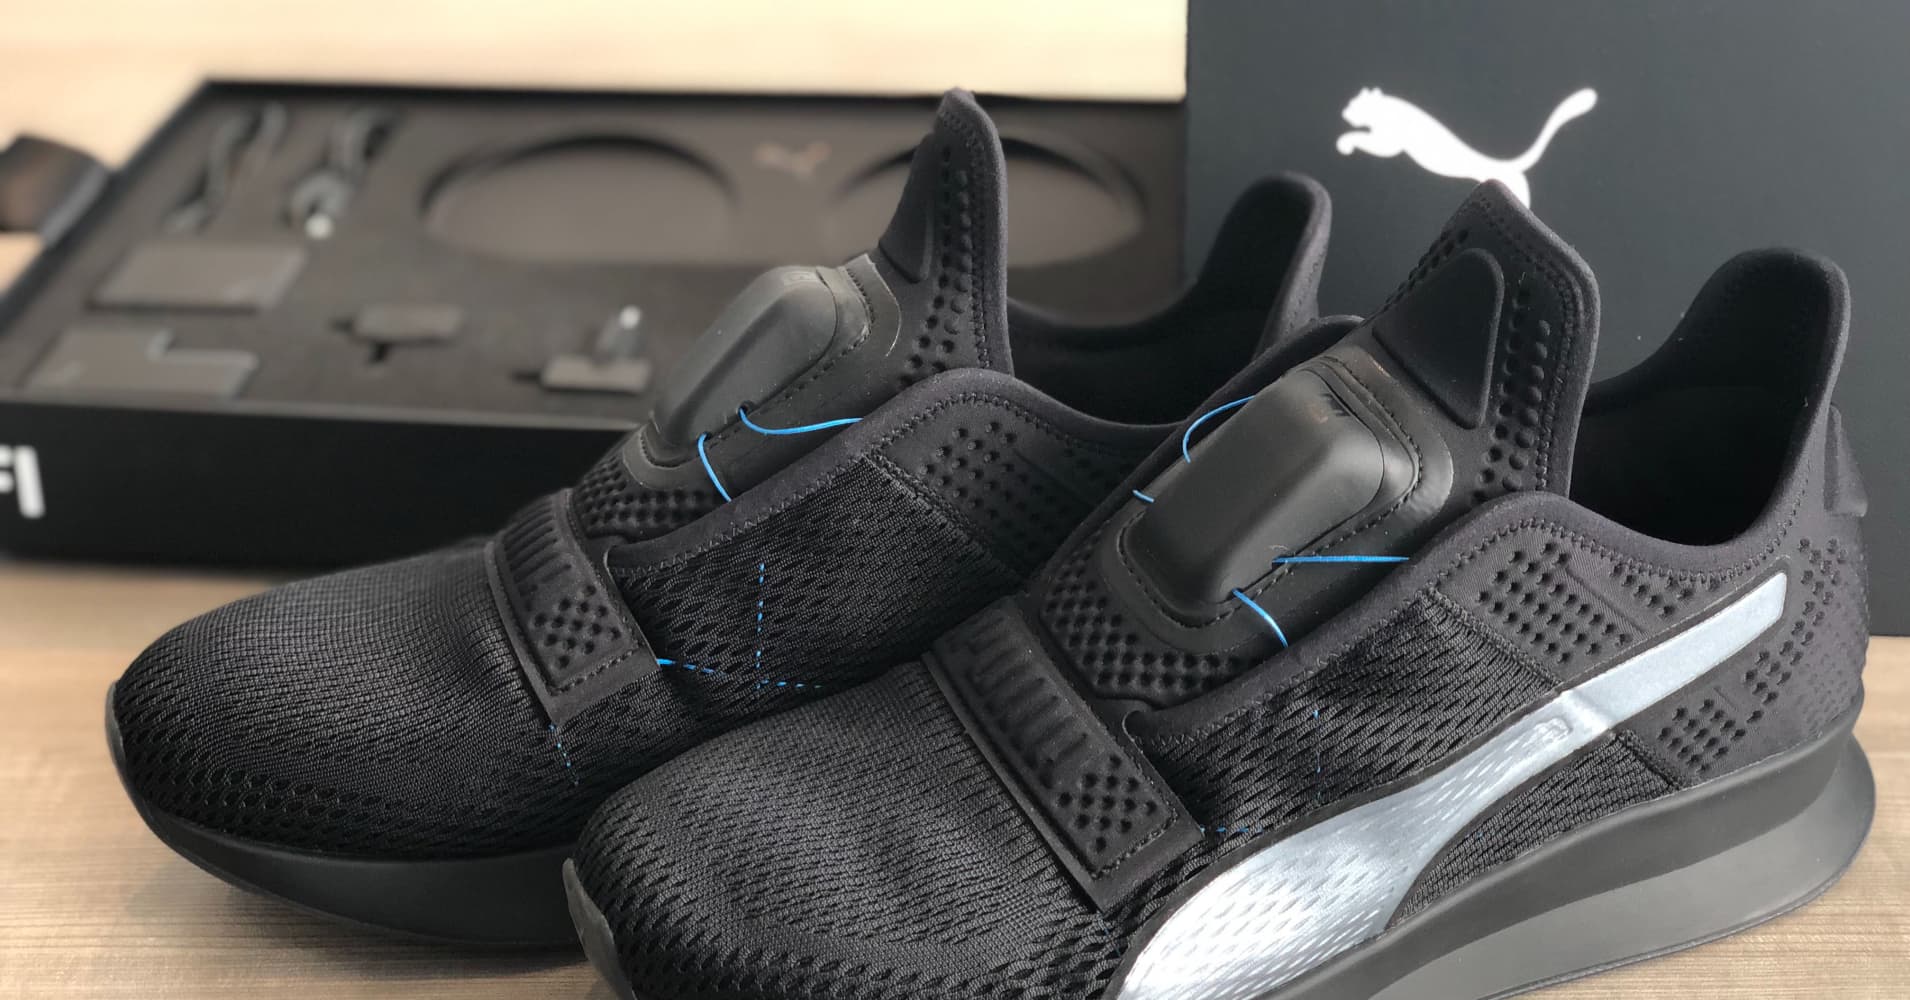 Puma is releasing self-lacing smart shoes to take on Nike